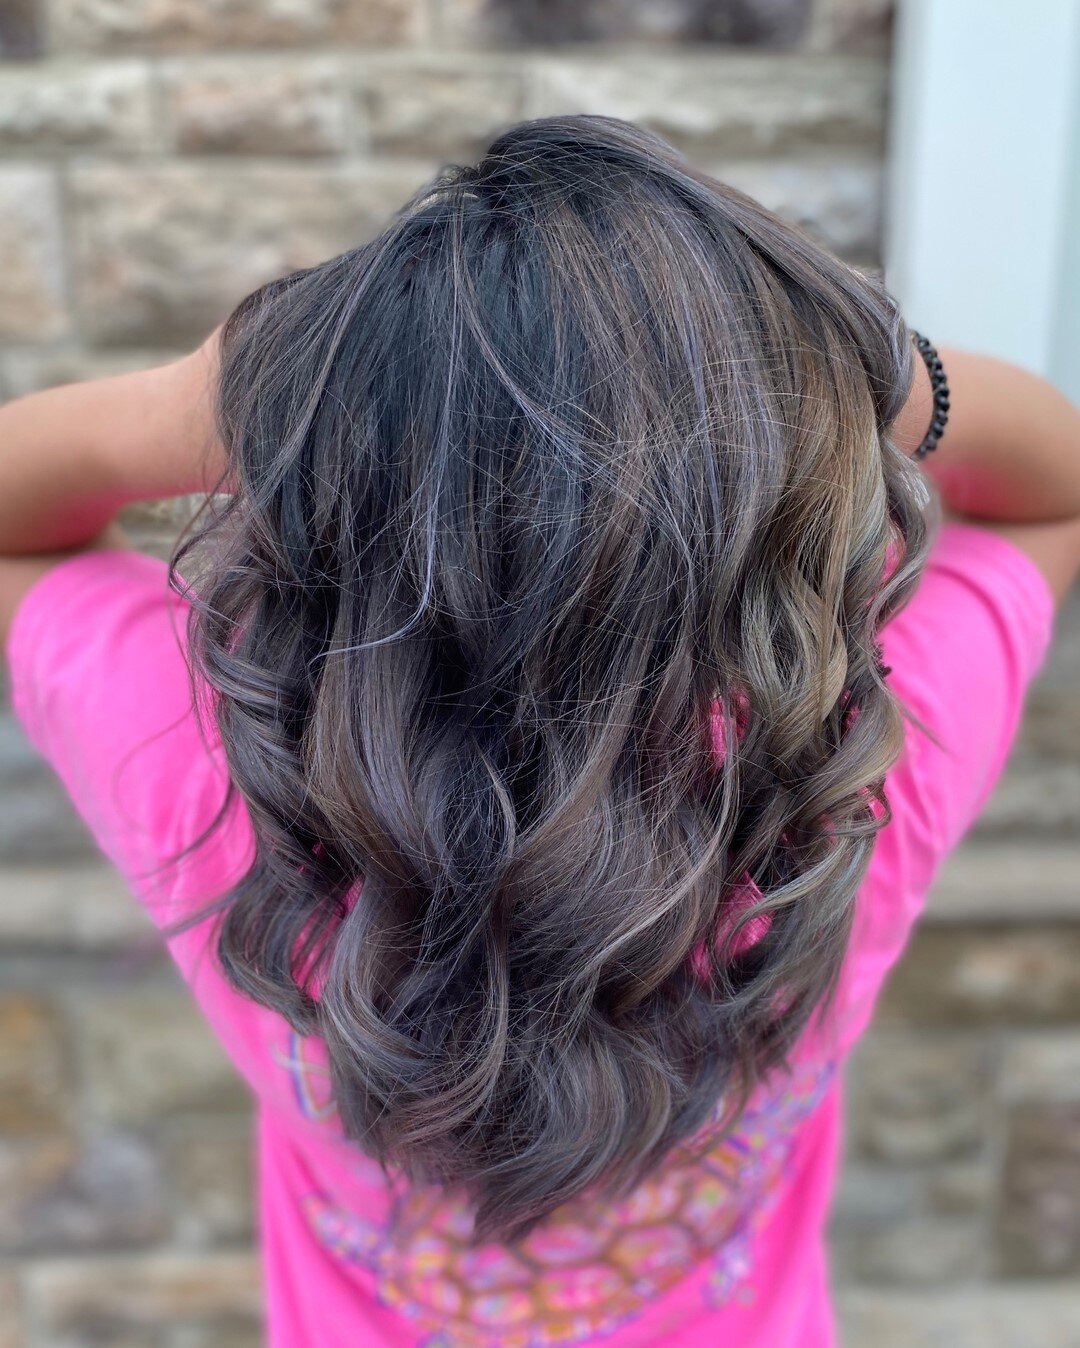 We're seriously loving this subtle color! What would you name this style?? 🦋